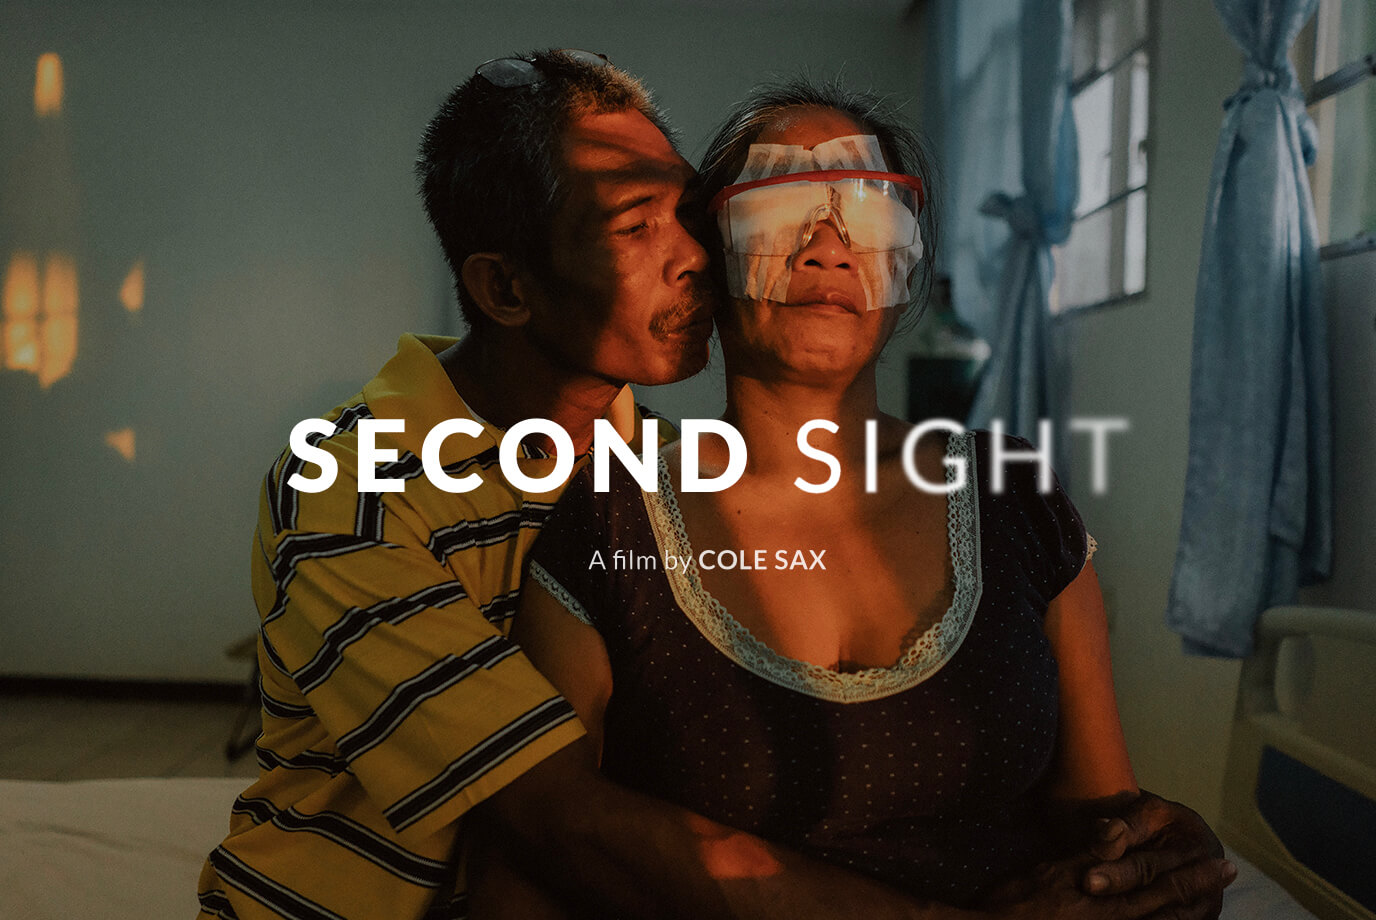 Reel image for Second Sight